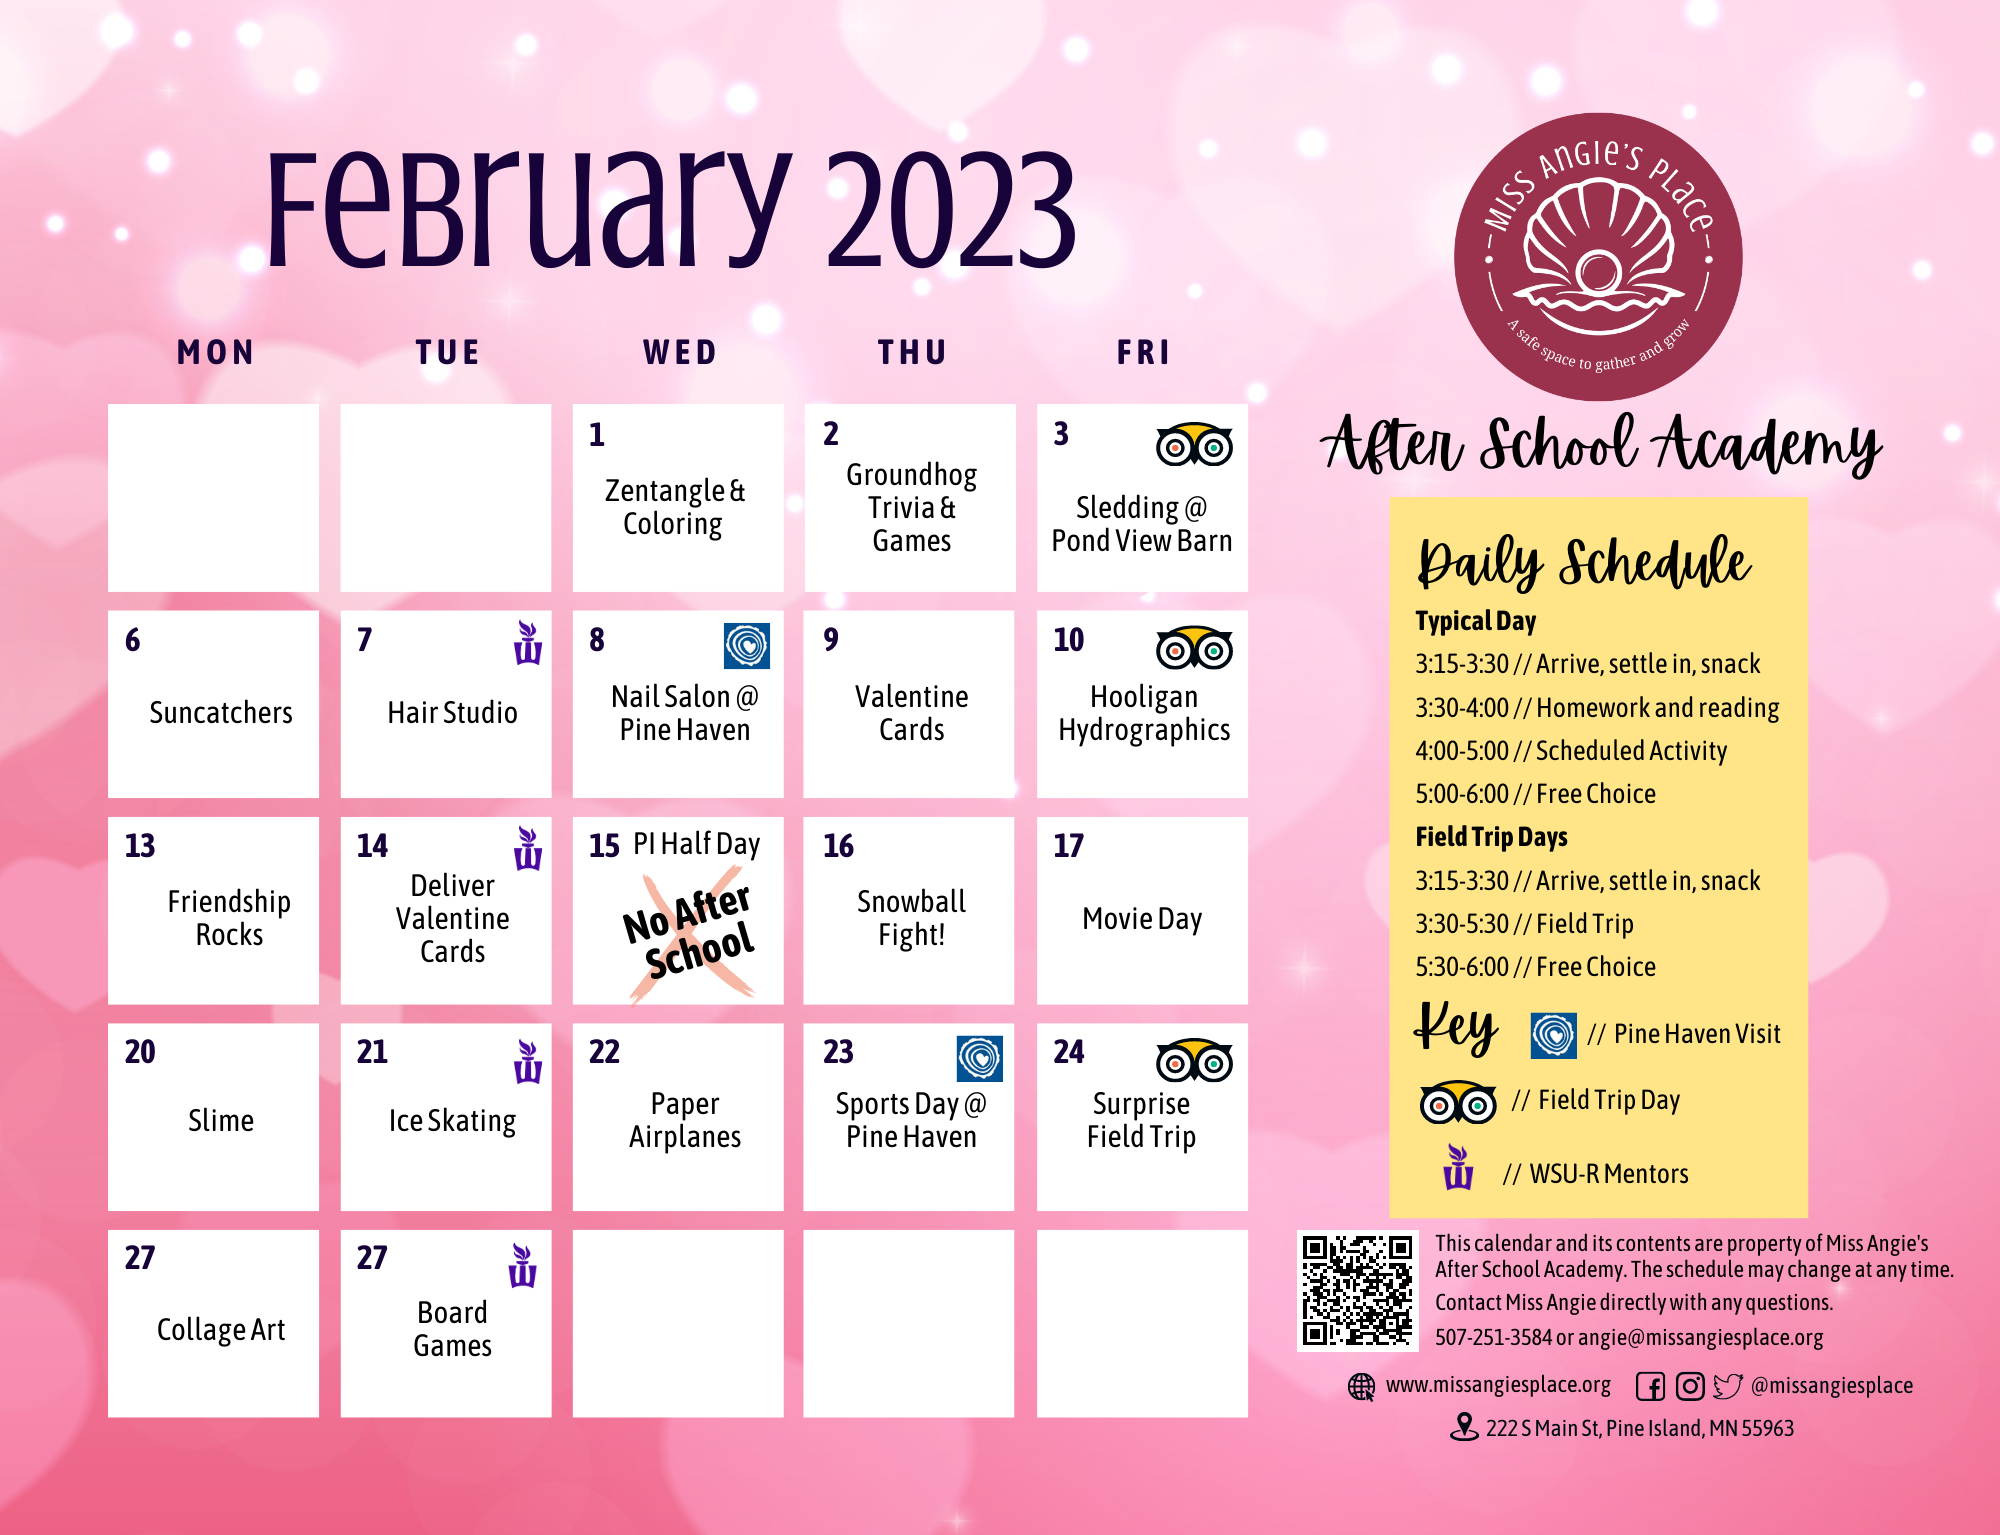 After School Academy February Calendar! Miss Angie's Place